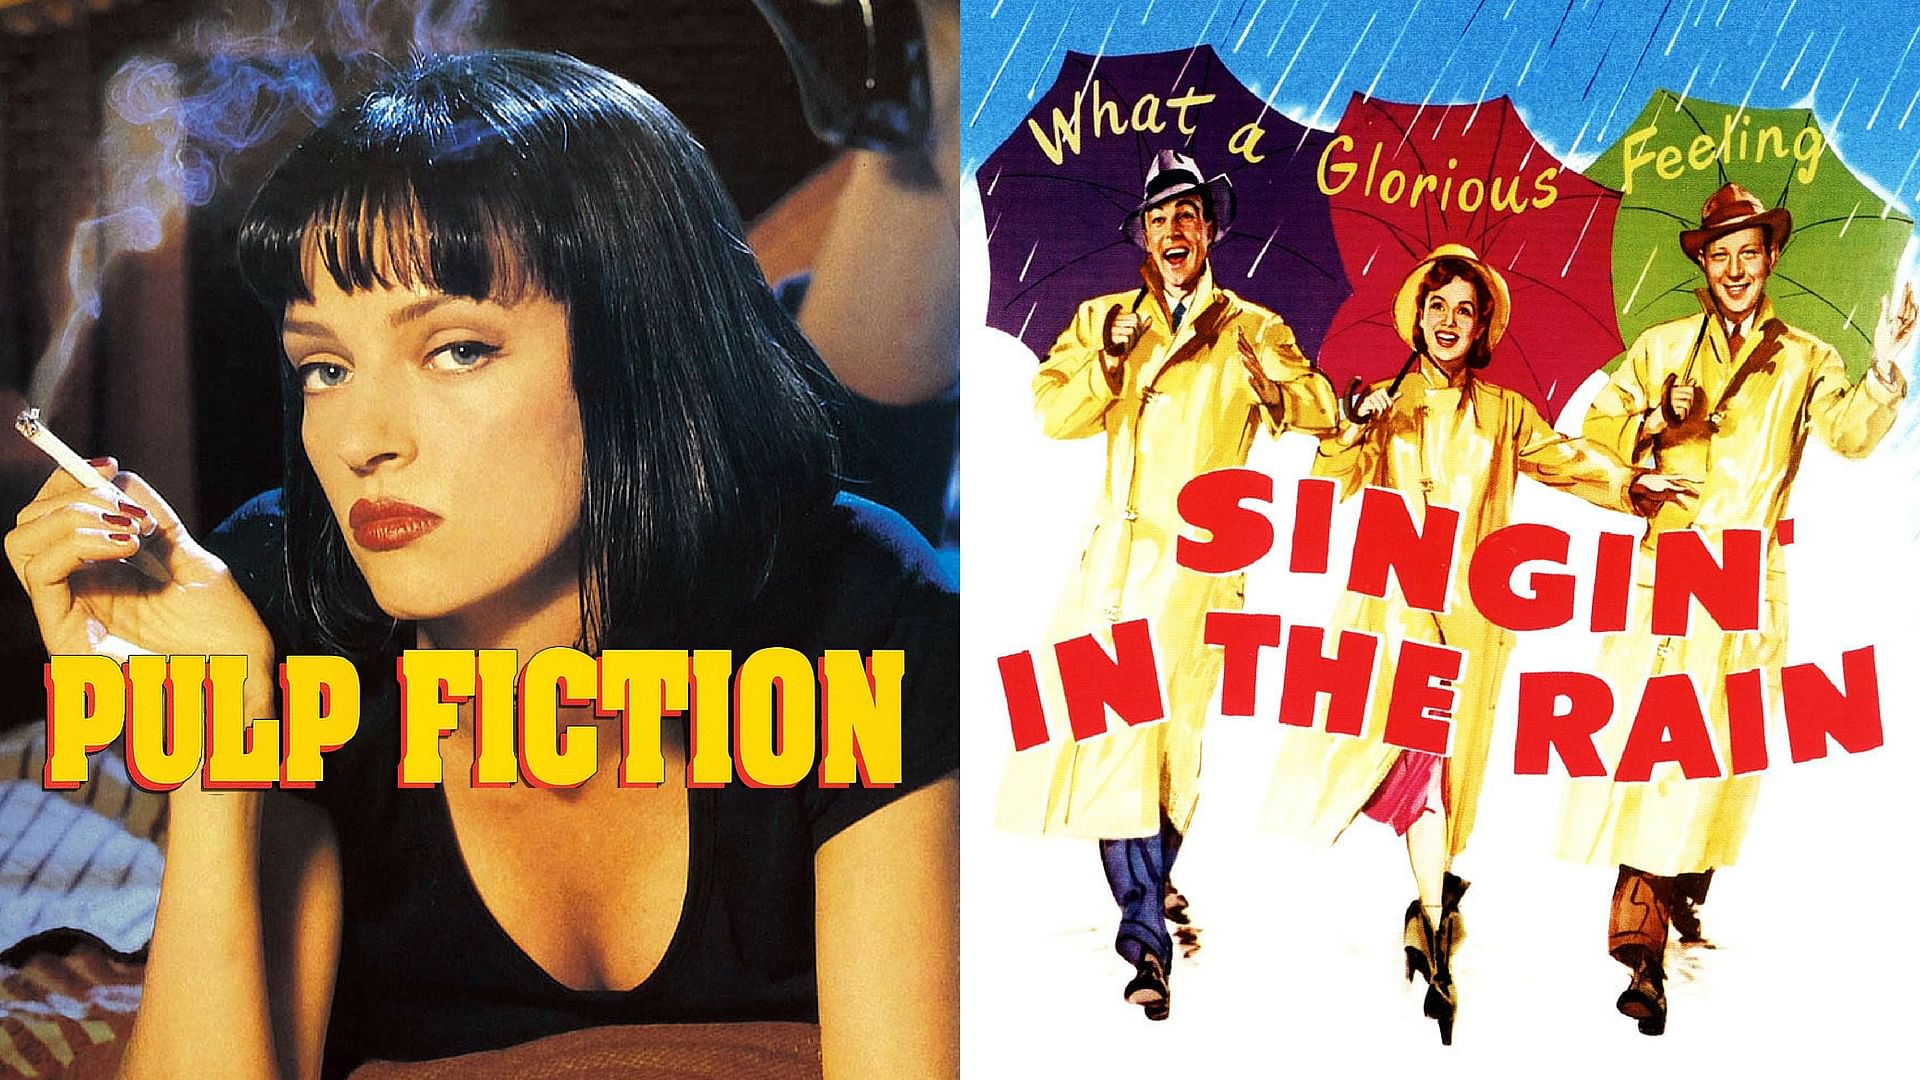 Can you believe that cult classics like<i> Pulp Fiction</i> and <i>Singin In The Rain </i>never won an Oscar for Best Picture? (Photos: Film posters)